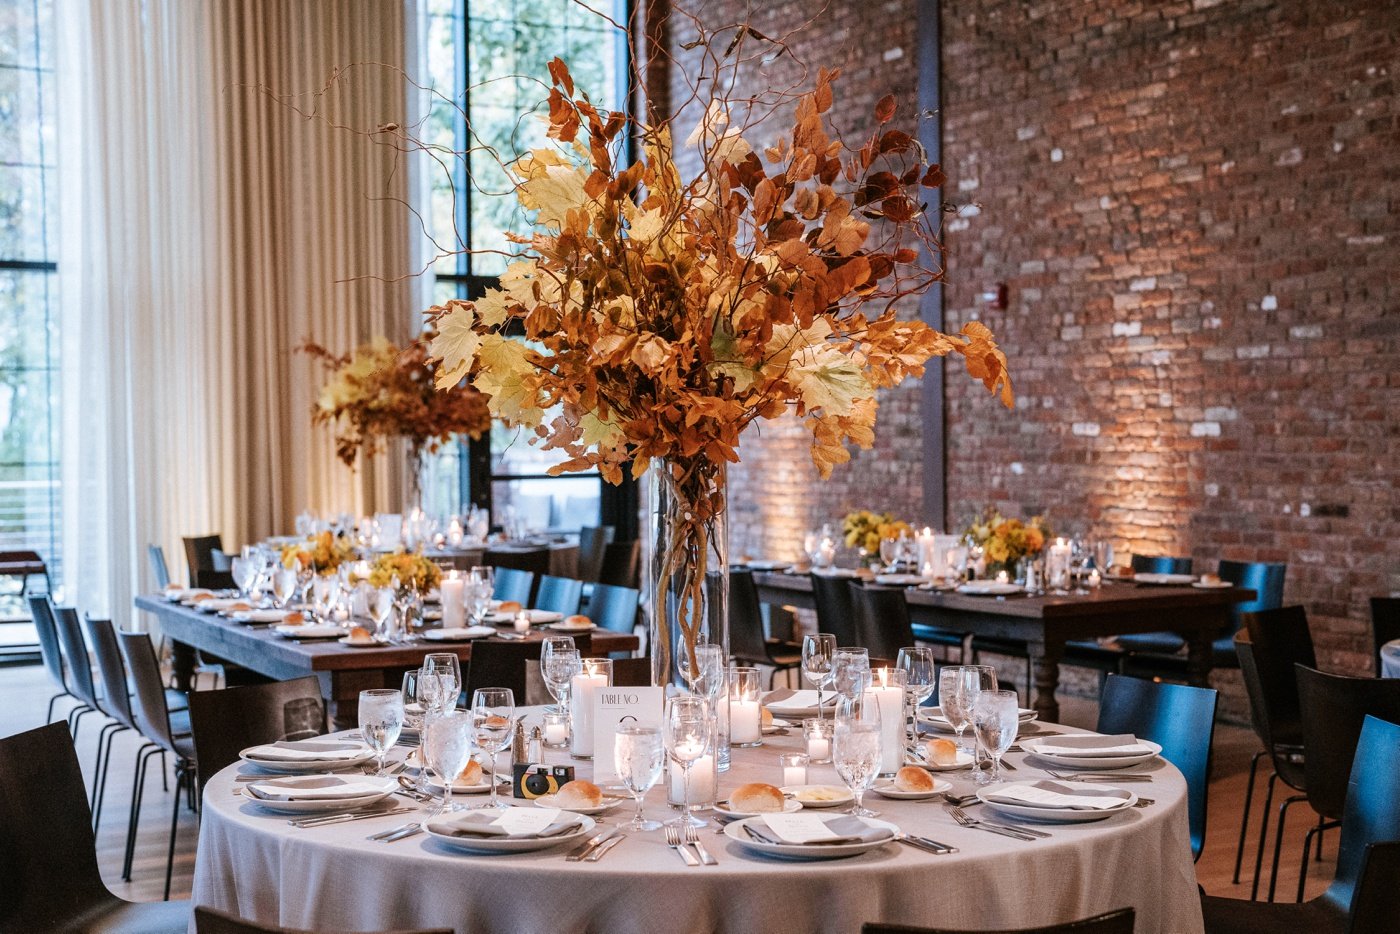 A centerpiece with fall leaves and branches by Athabold